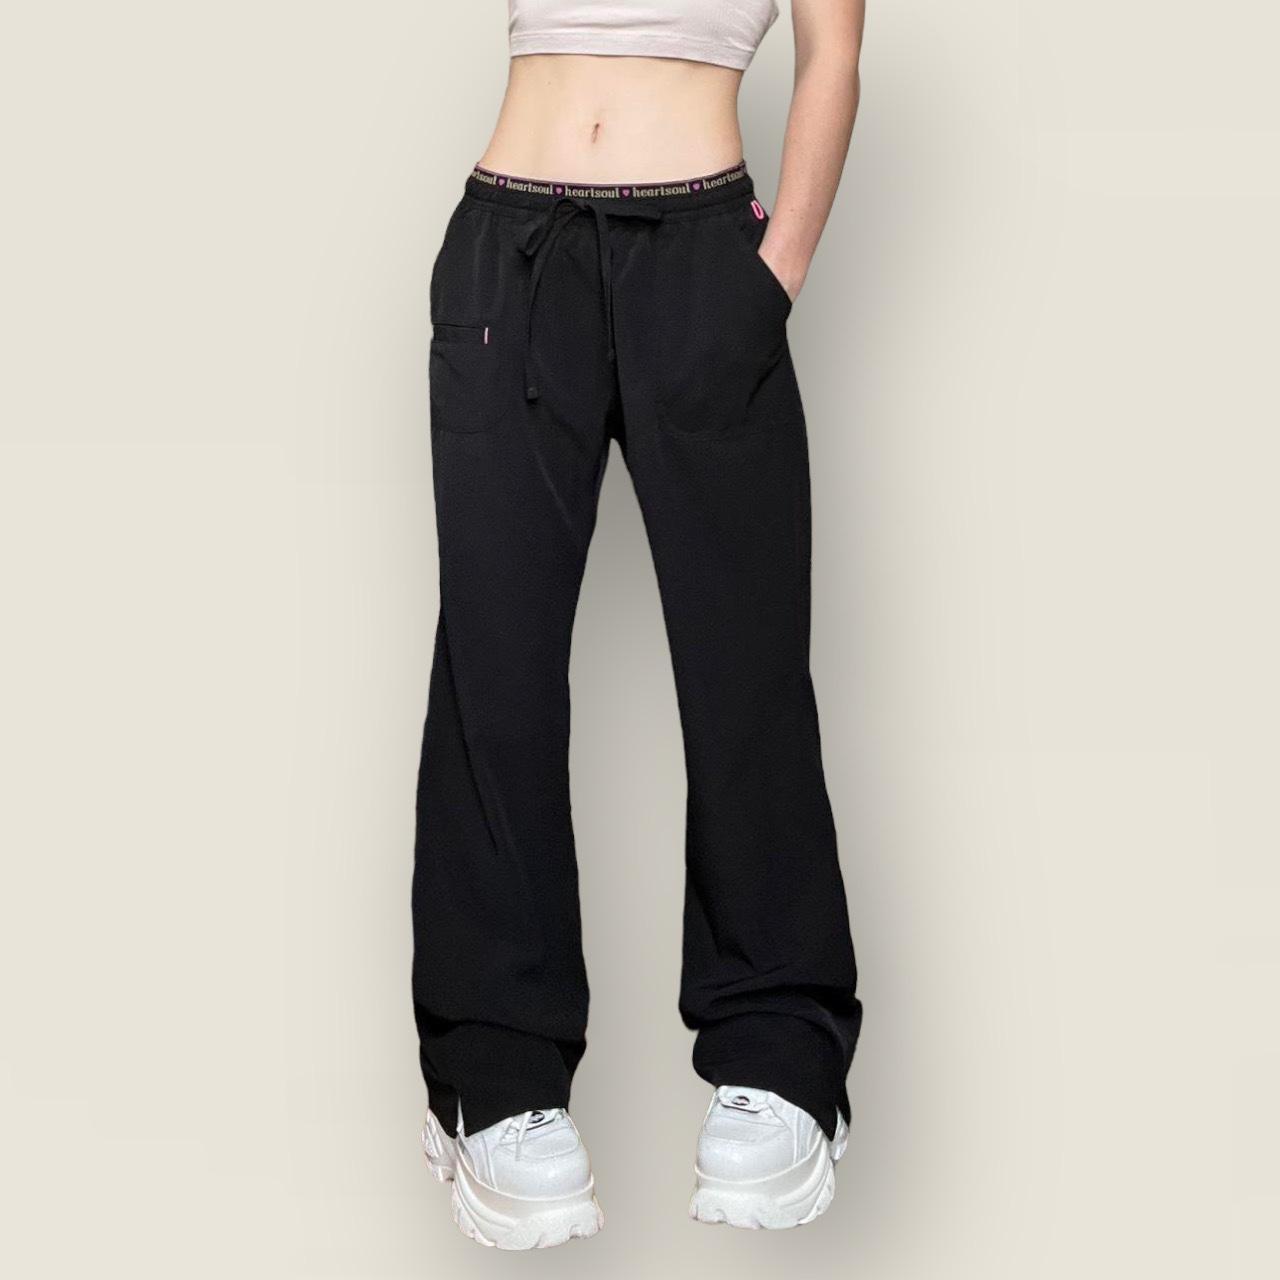 DKNY Women's Black and Pink Joggers-tracksuits